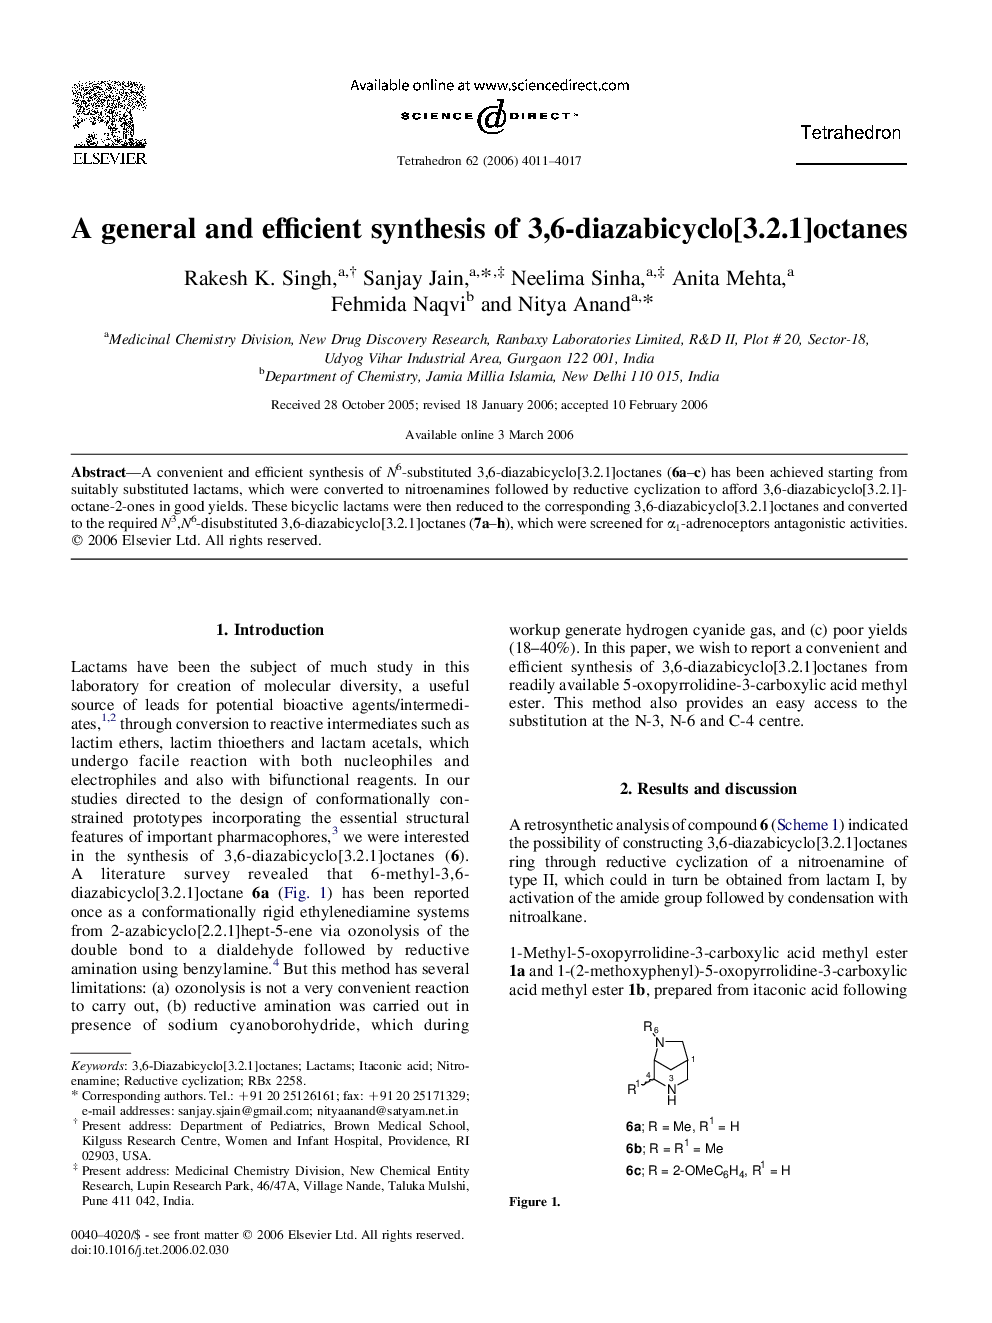 A general and efficient synthesis of 3,6-diazabicyclo[3.2.1]octanes